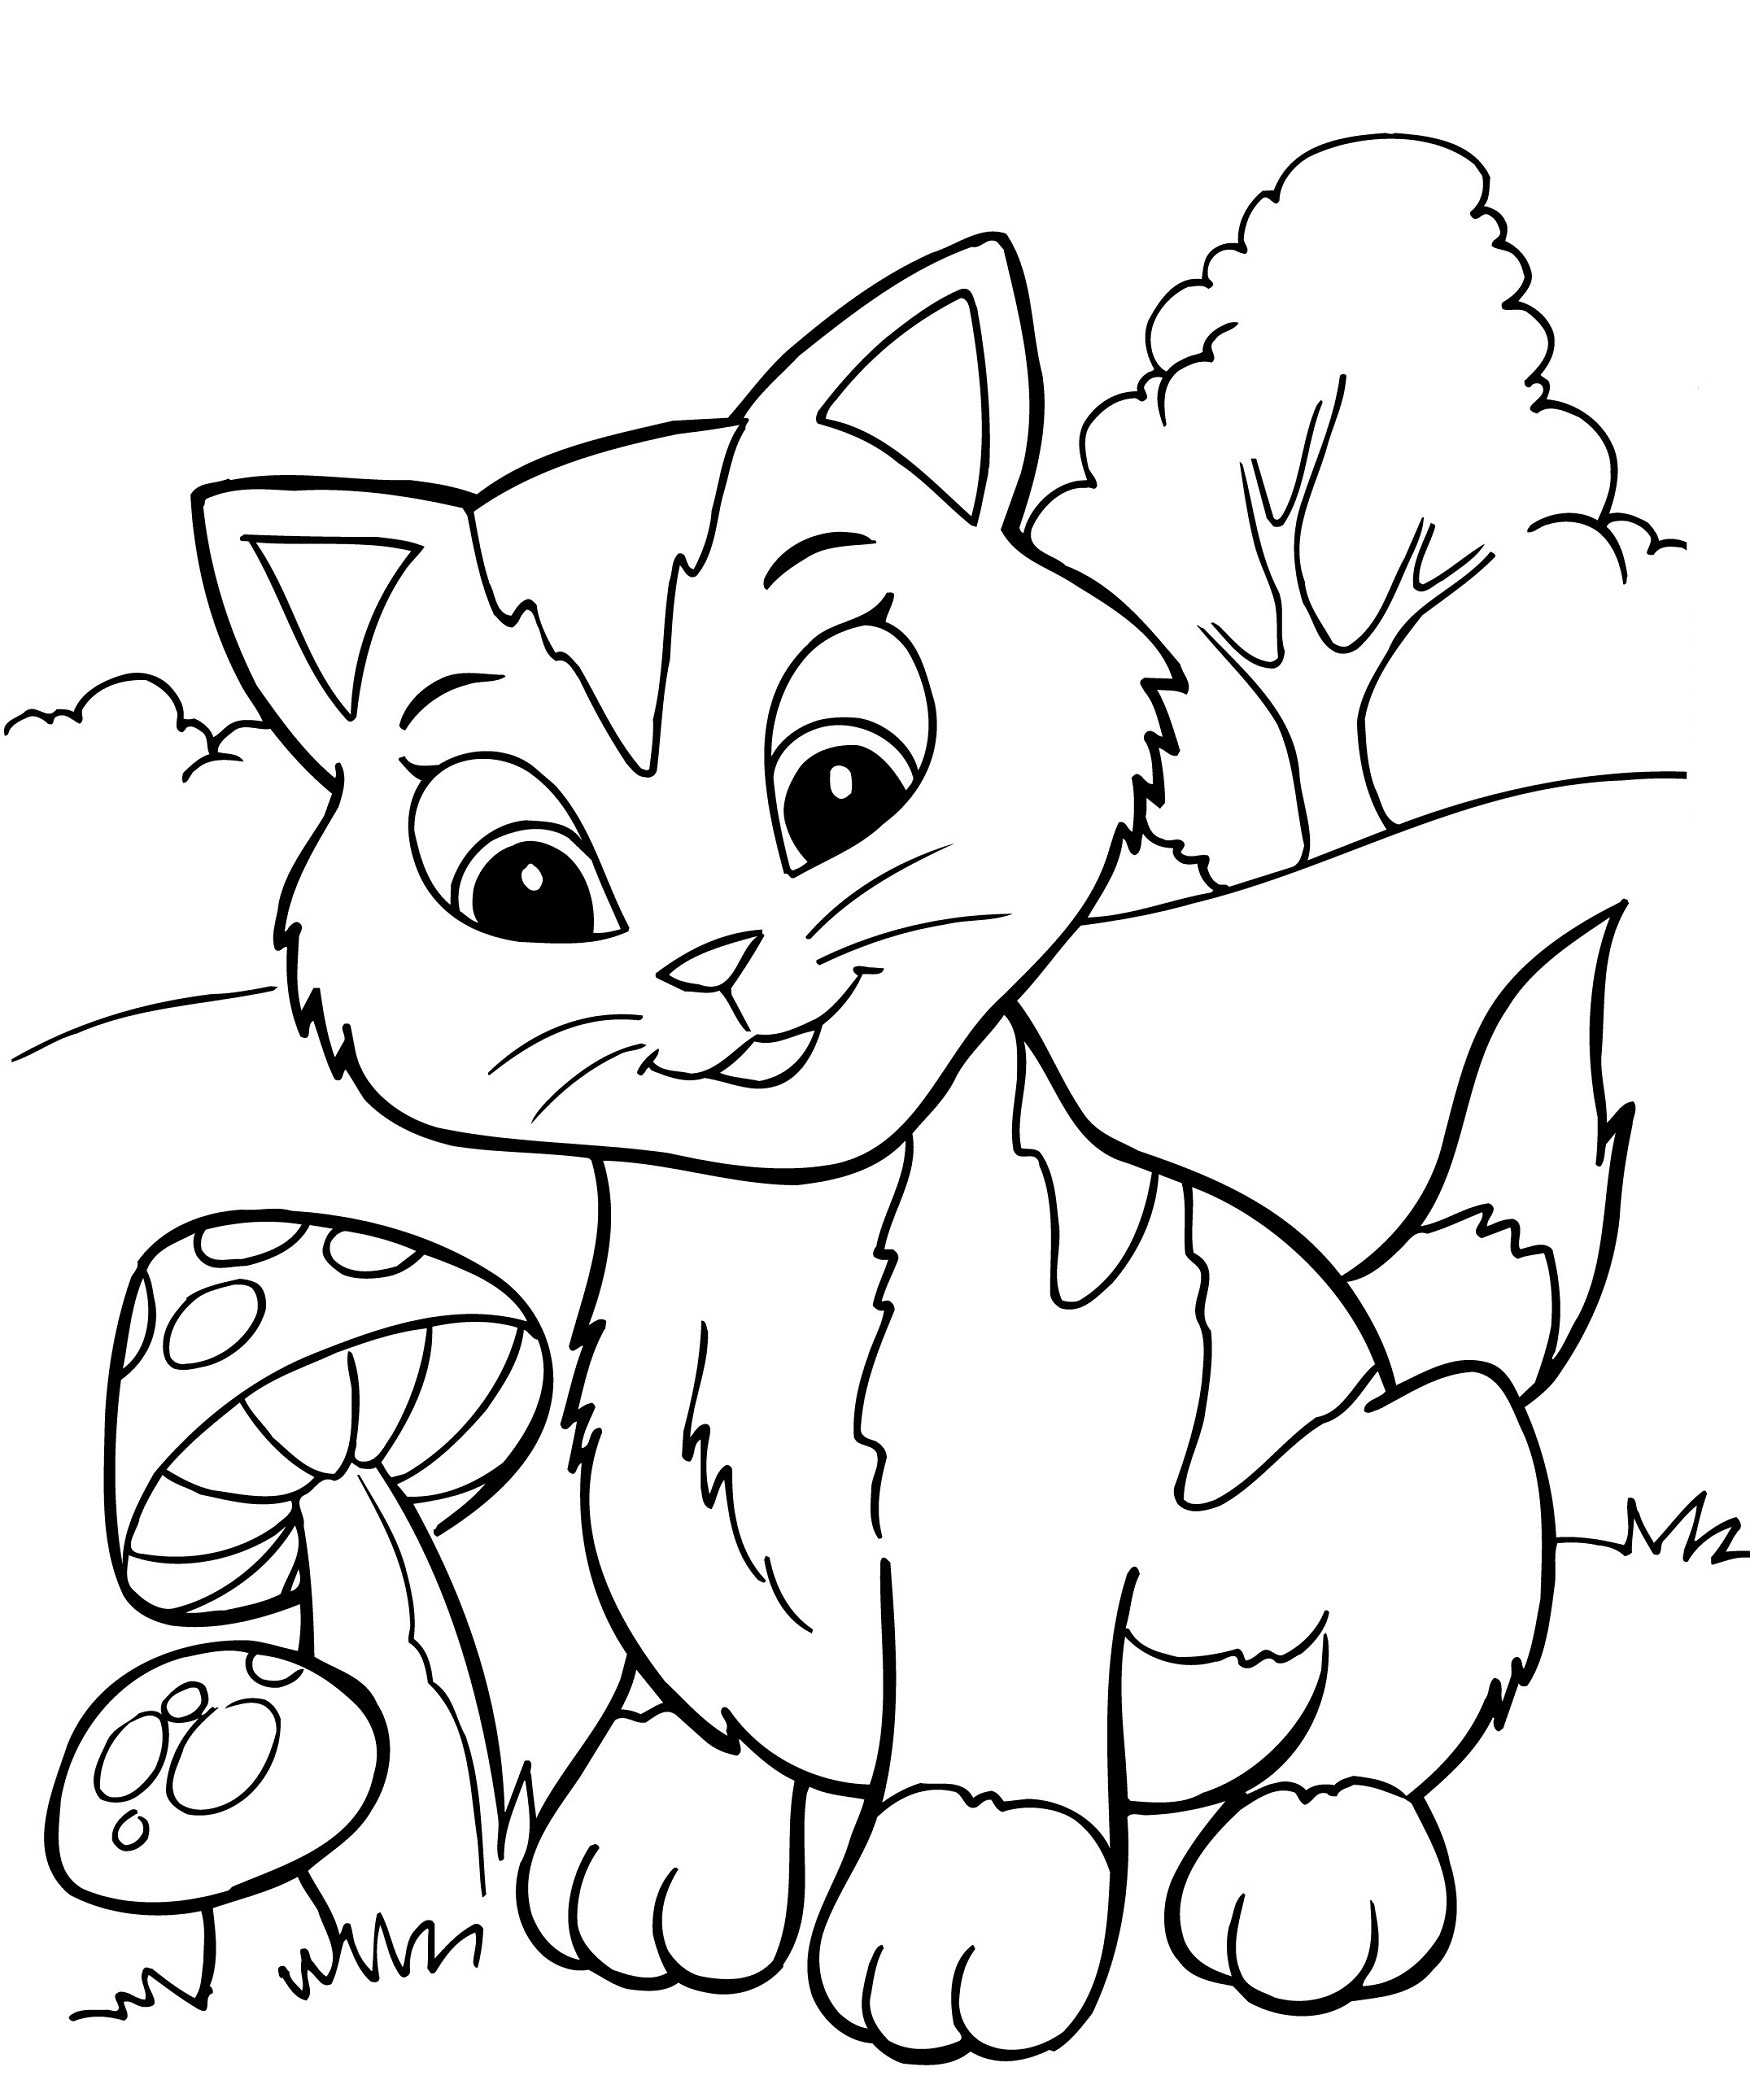 Cat Coloring Pages For Kids
 Free Printable Kitten Coloring Pages For Kids Best